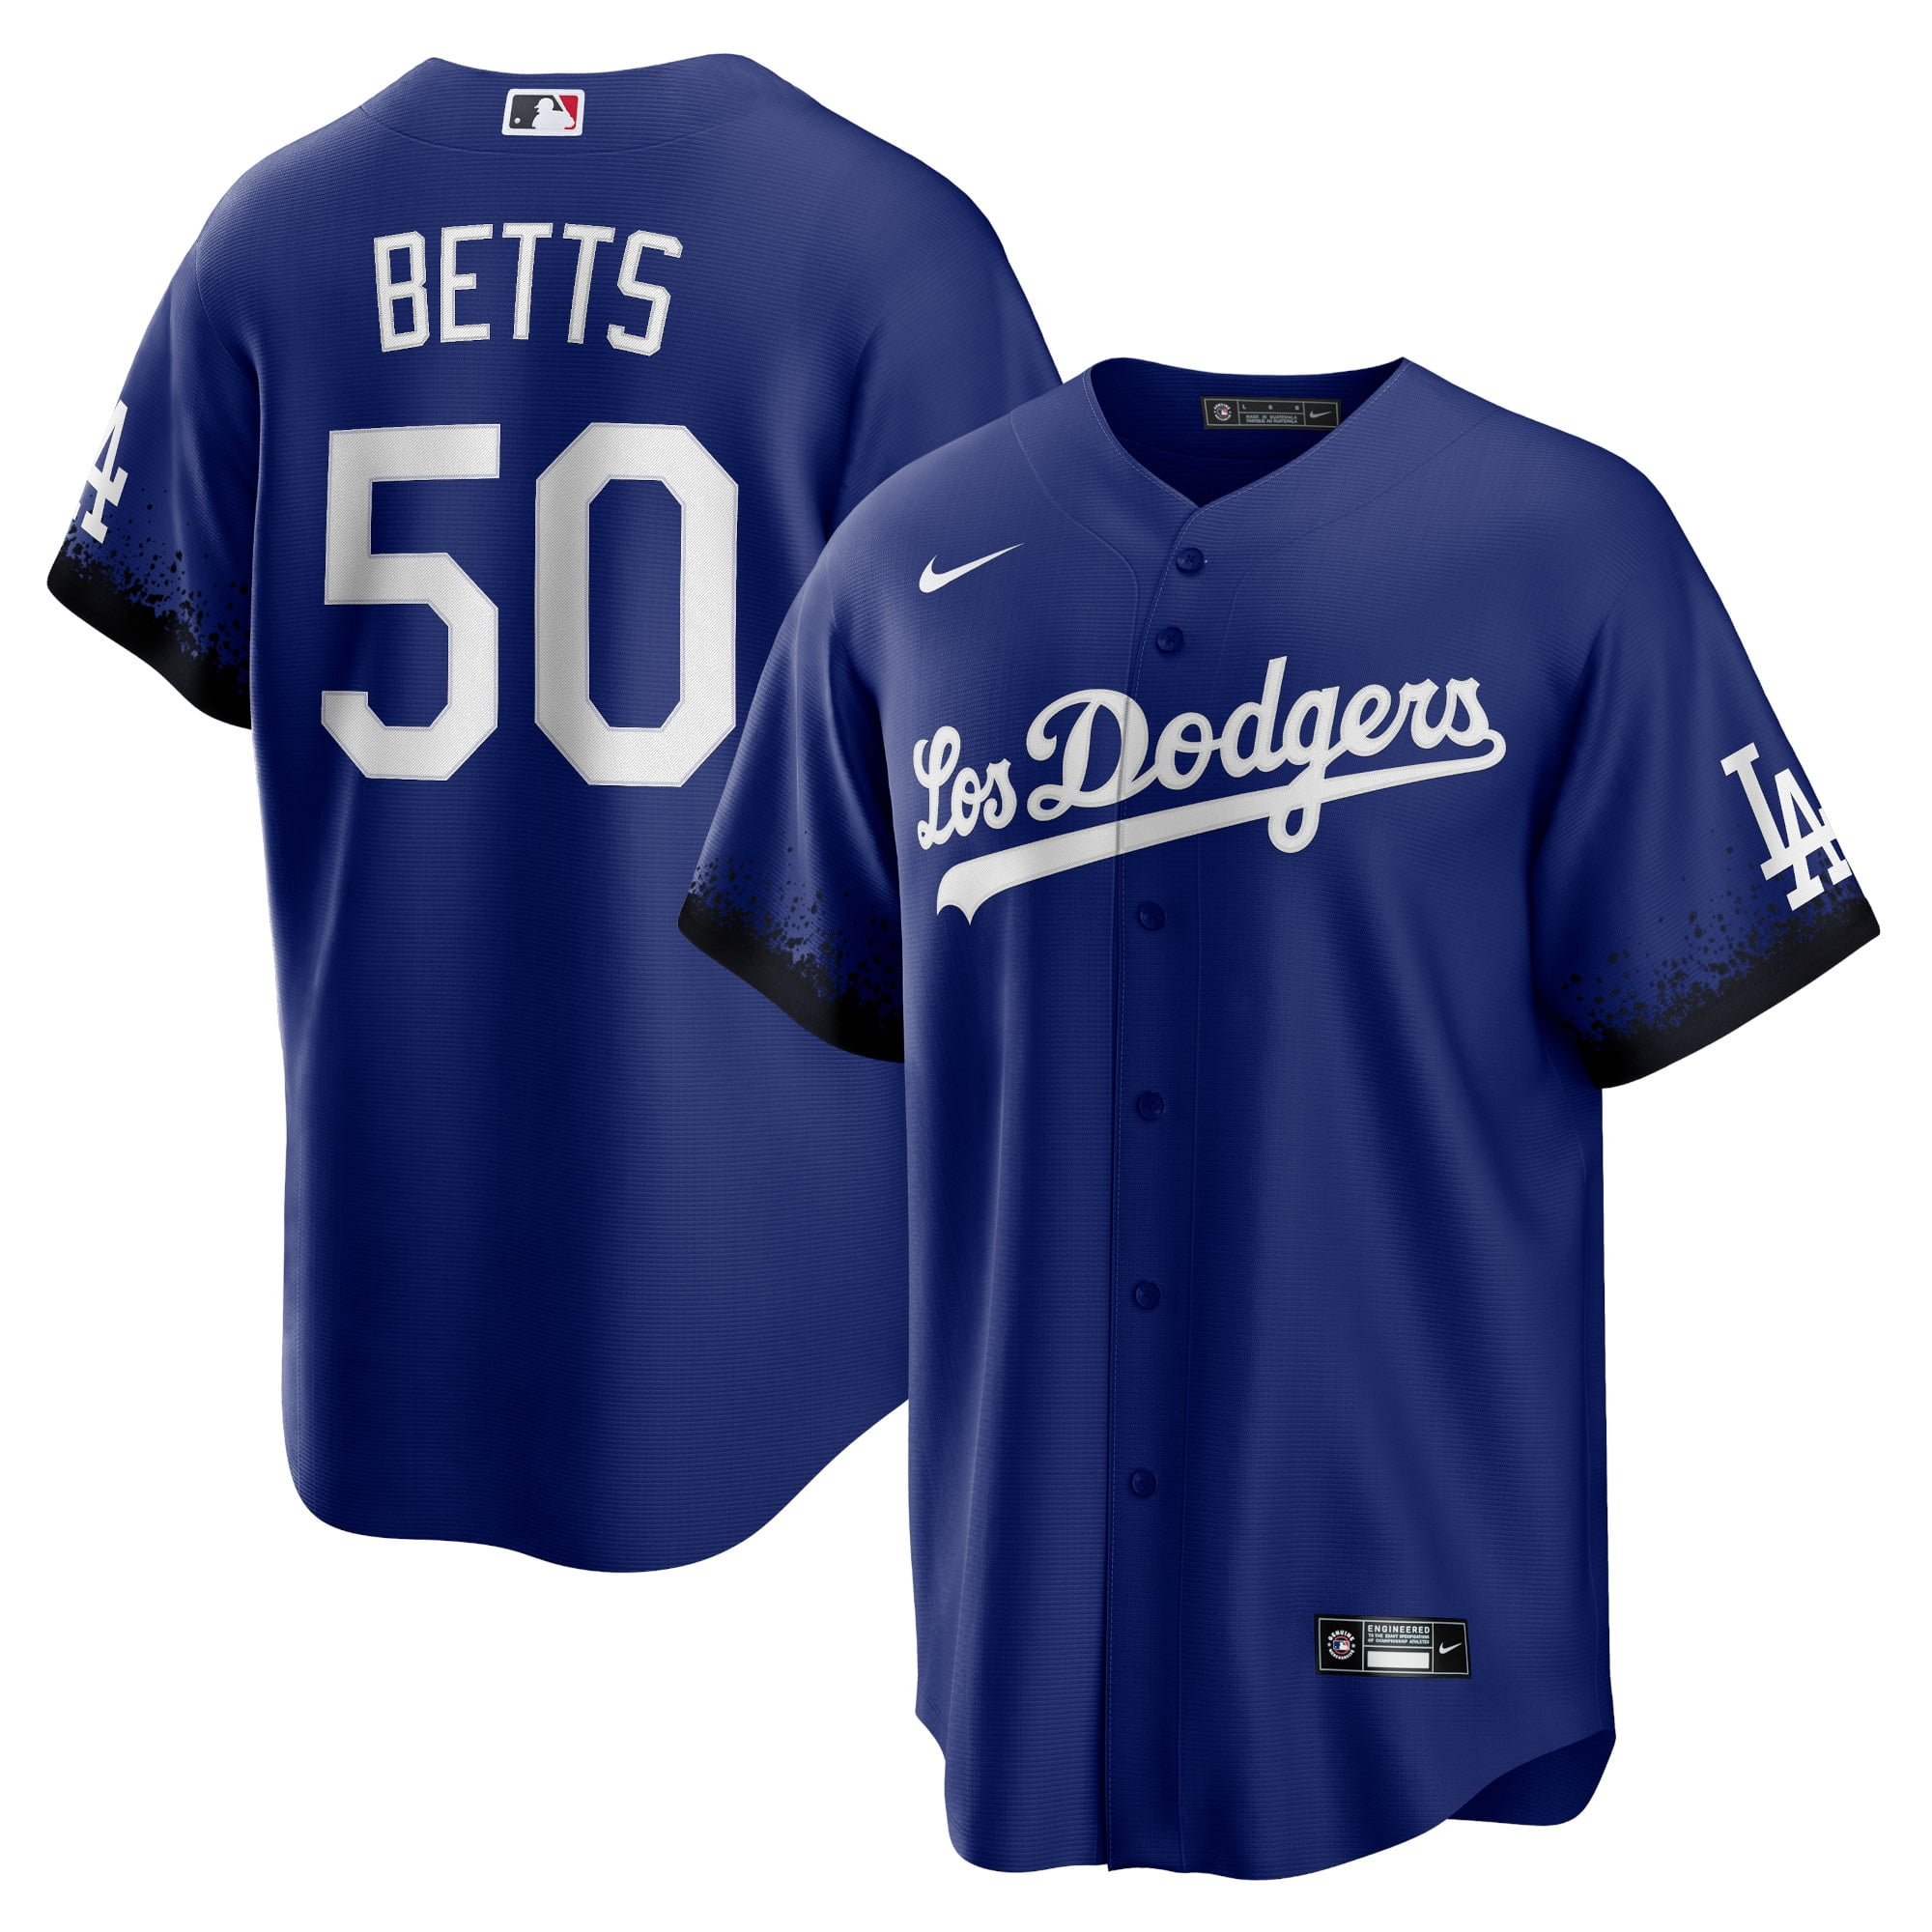 Fanatics Authentic Mookie Betts Los Angeles Dodgers Autographed Gray Nike Authentic Jersey